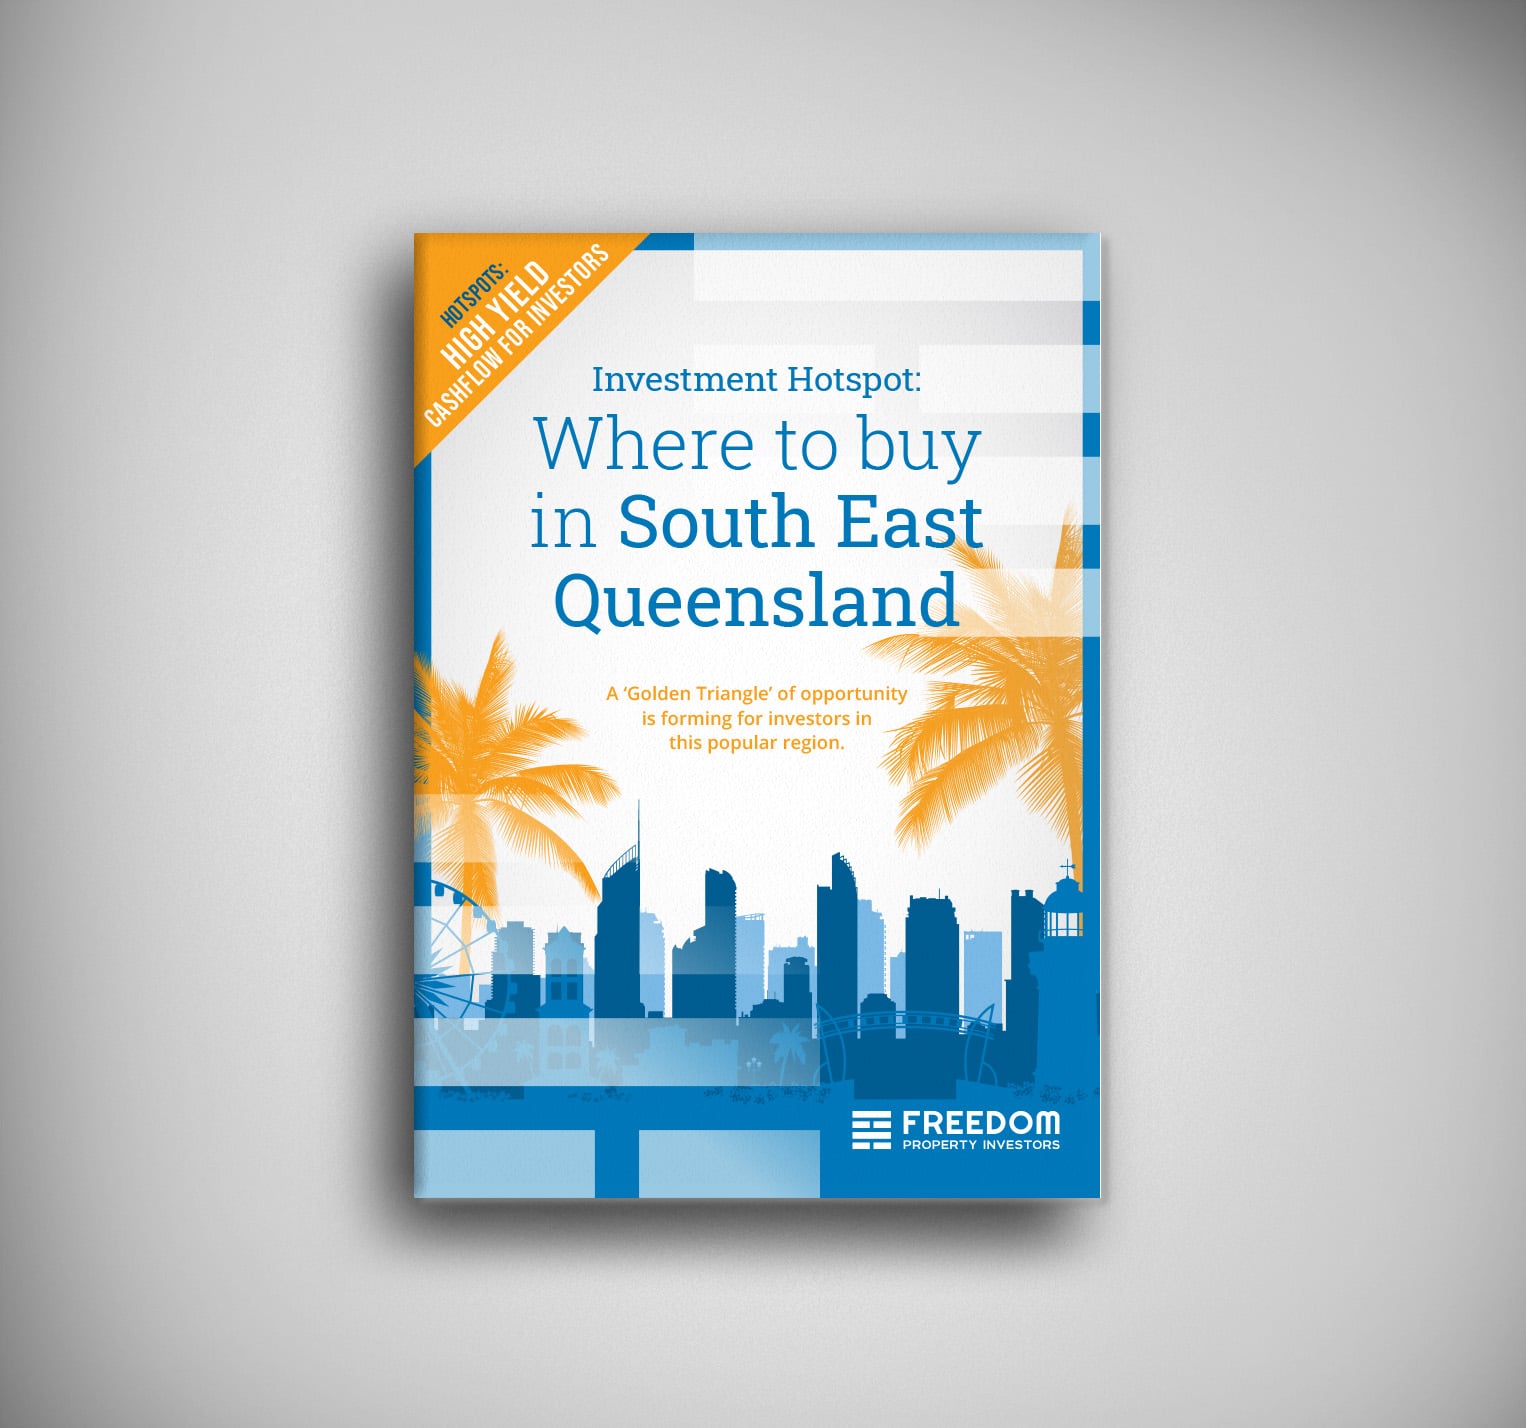 Investment Hotspot: Where to buy in South East Queensland